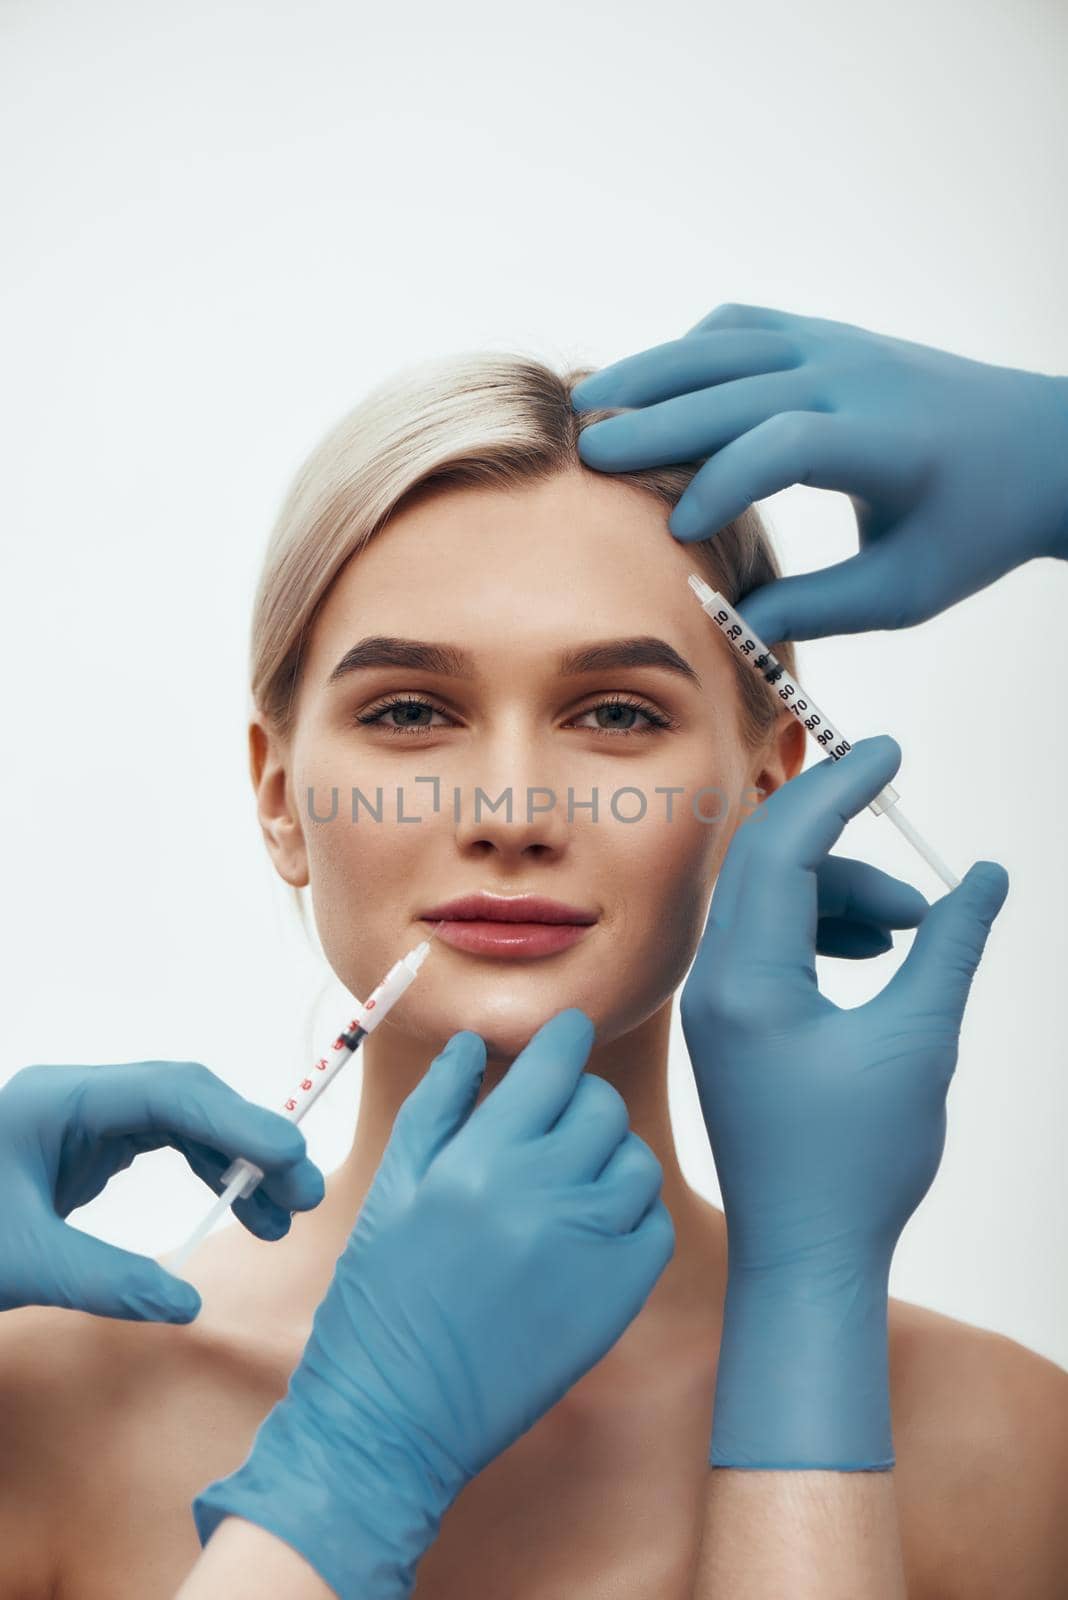 Creating beauty. Portrait of young pretty woman looking at camera and smiling while doctors in blue medical gloves making injections in her face. Botox concept. Beauty. Facial surgery